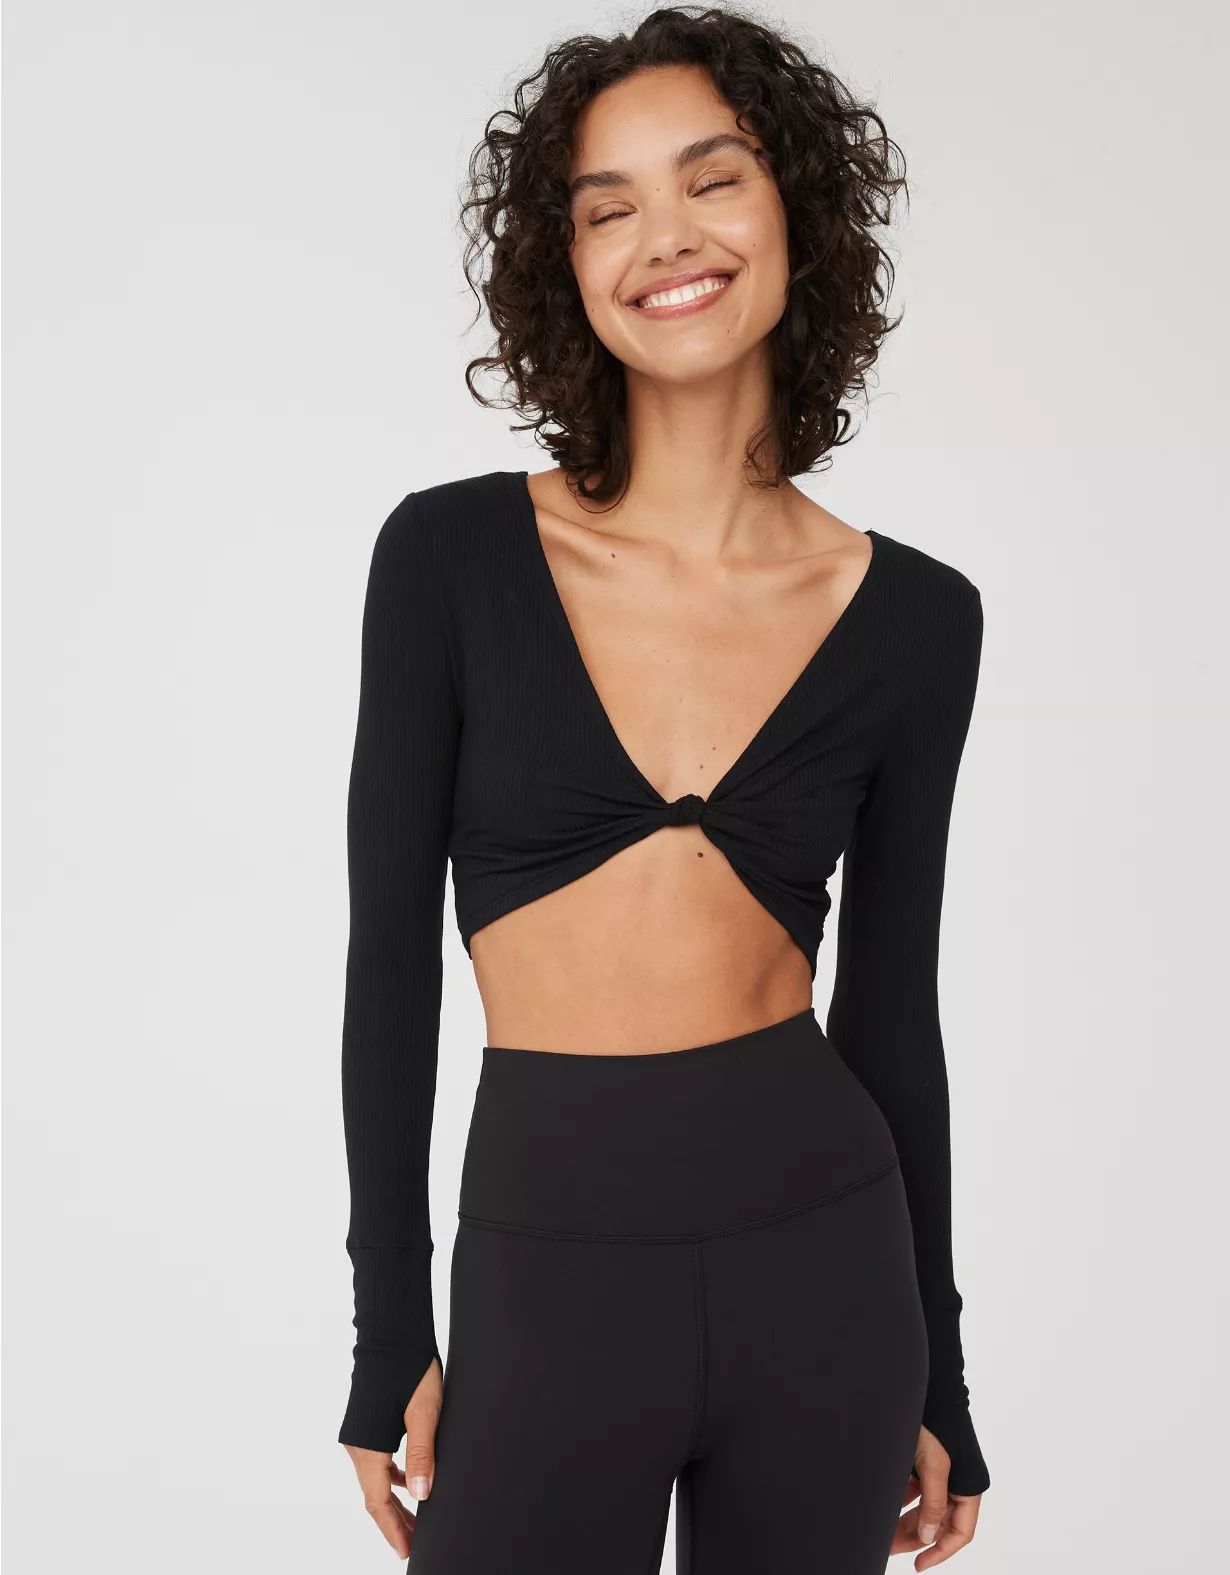 OFFLINE By Aerie Thumbs Up Bow Crop Top | Aerie